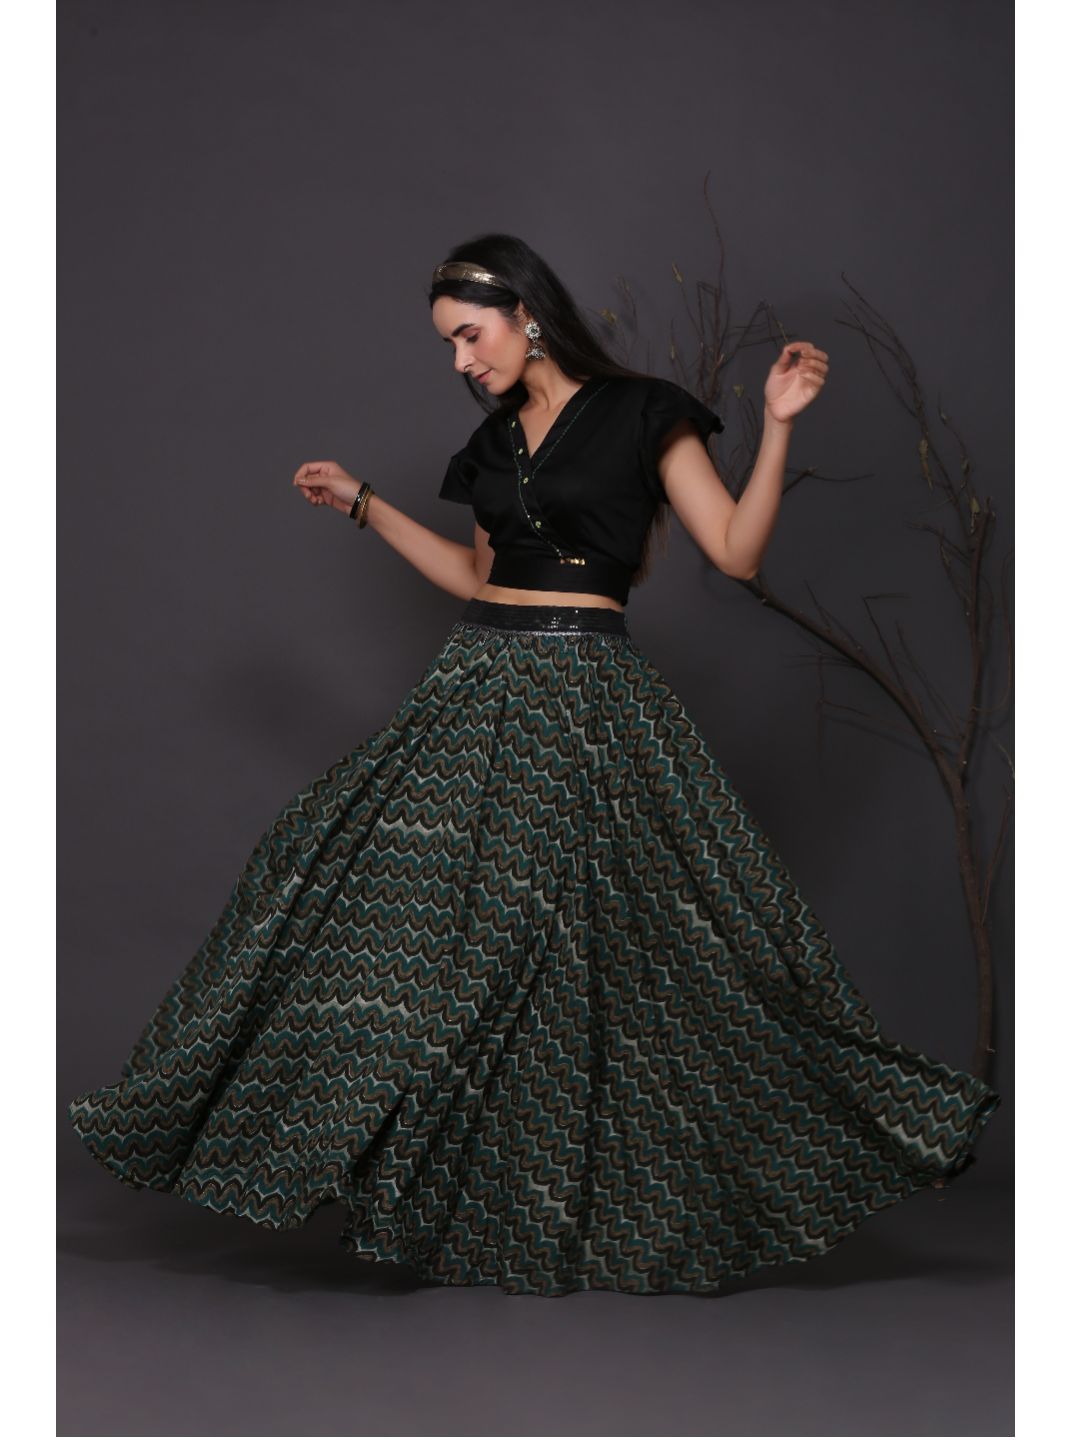 Green-Printed-Skirt-With-Black-Tie-Top